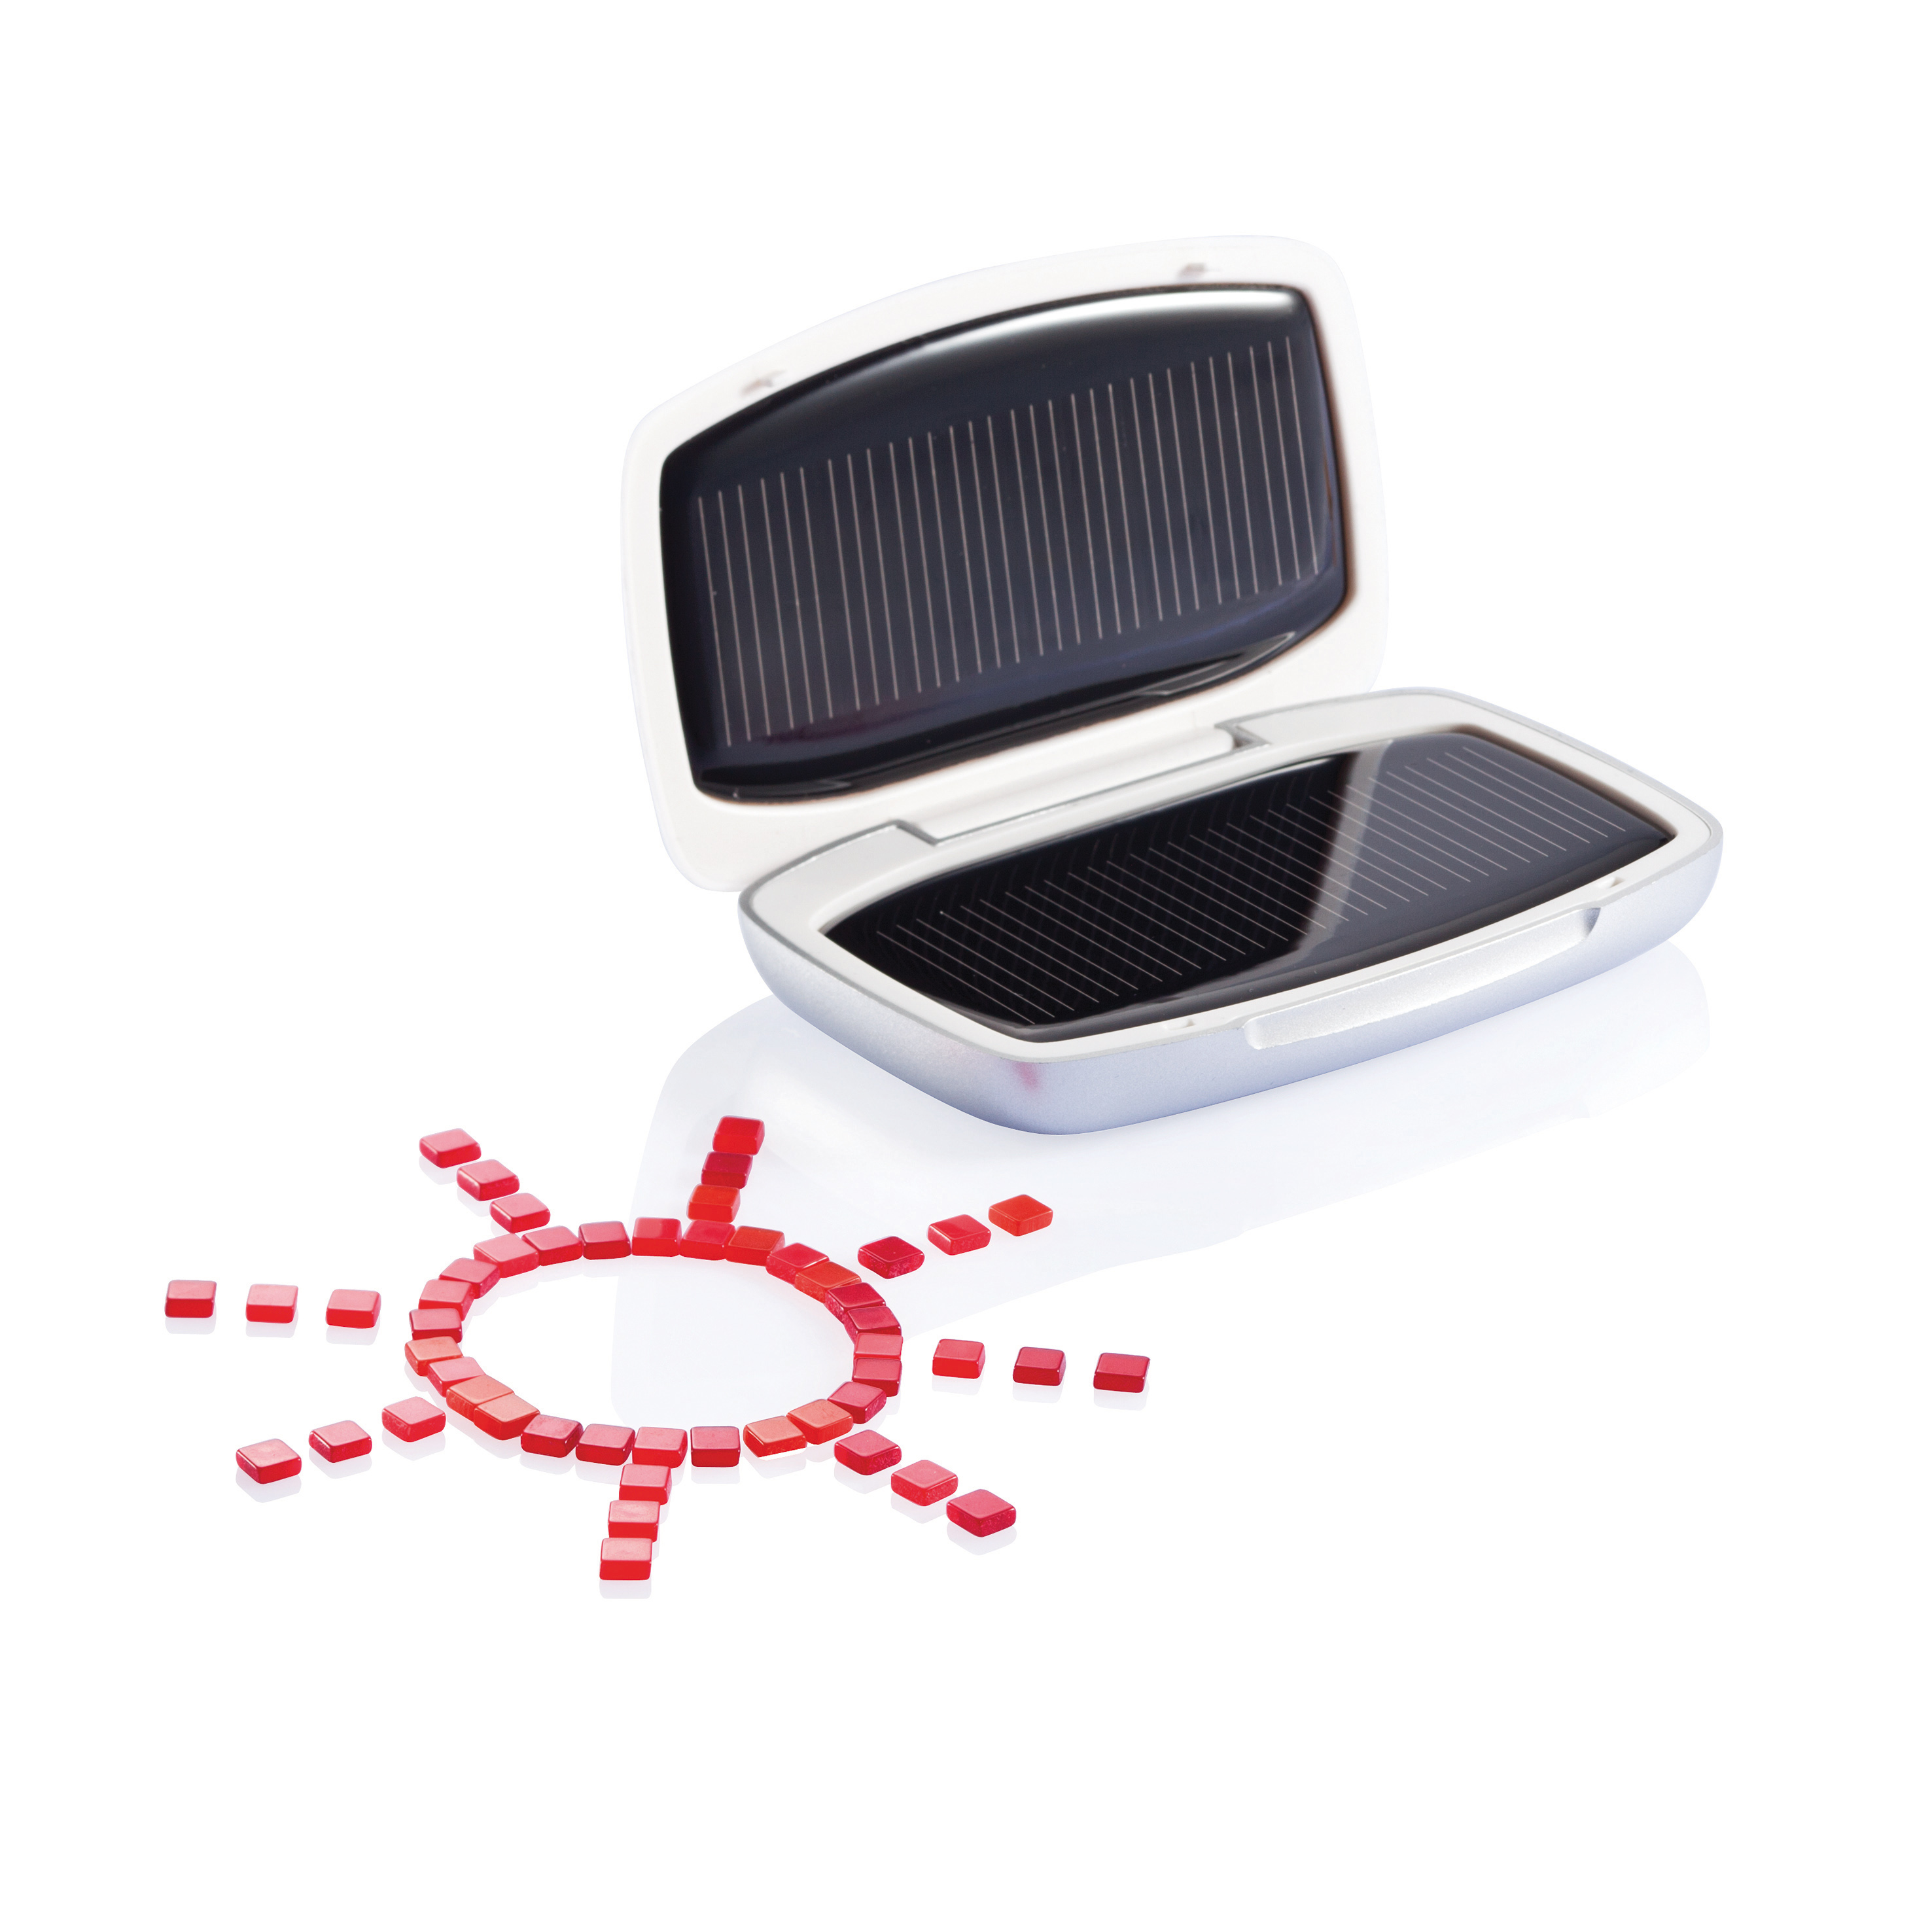 Sol travel charger